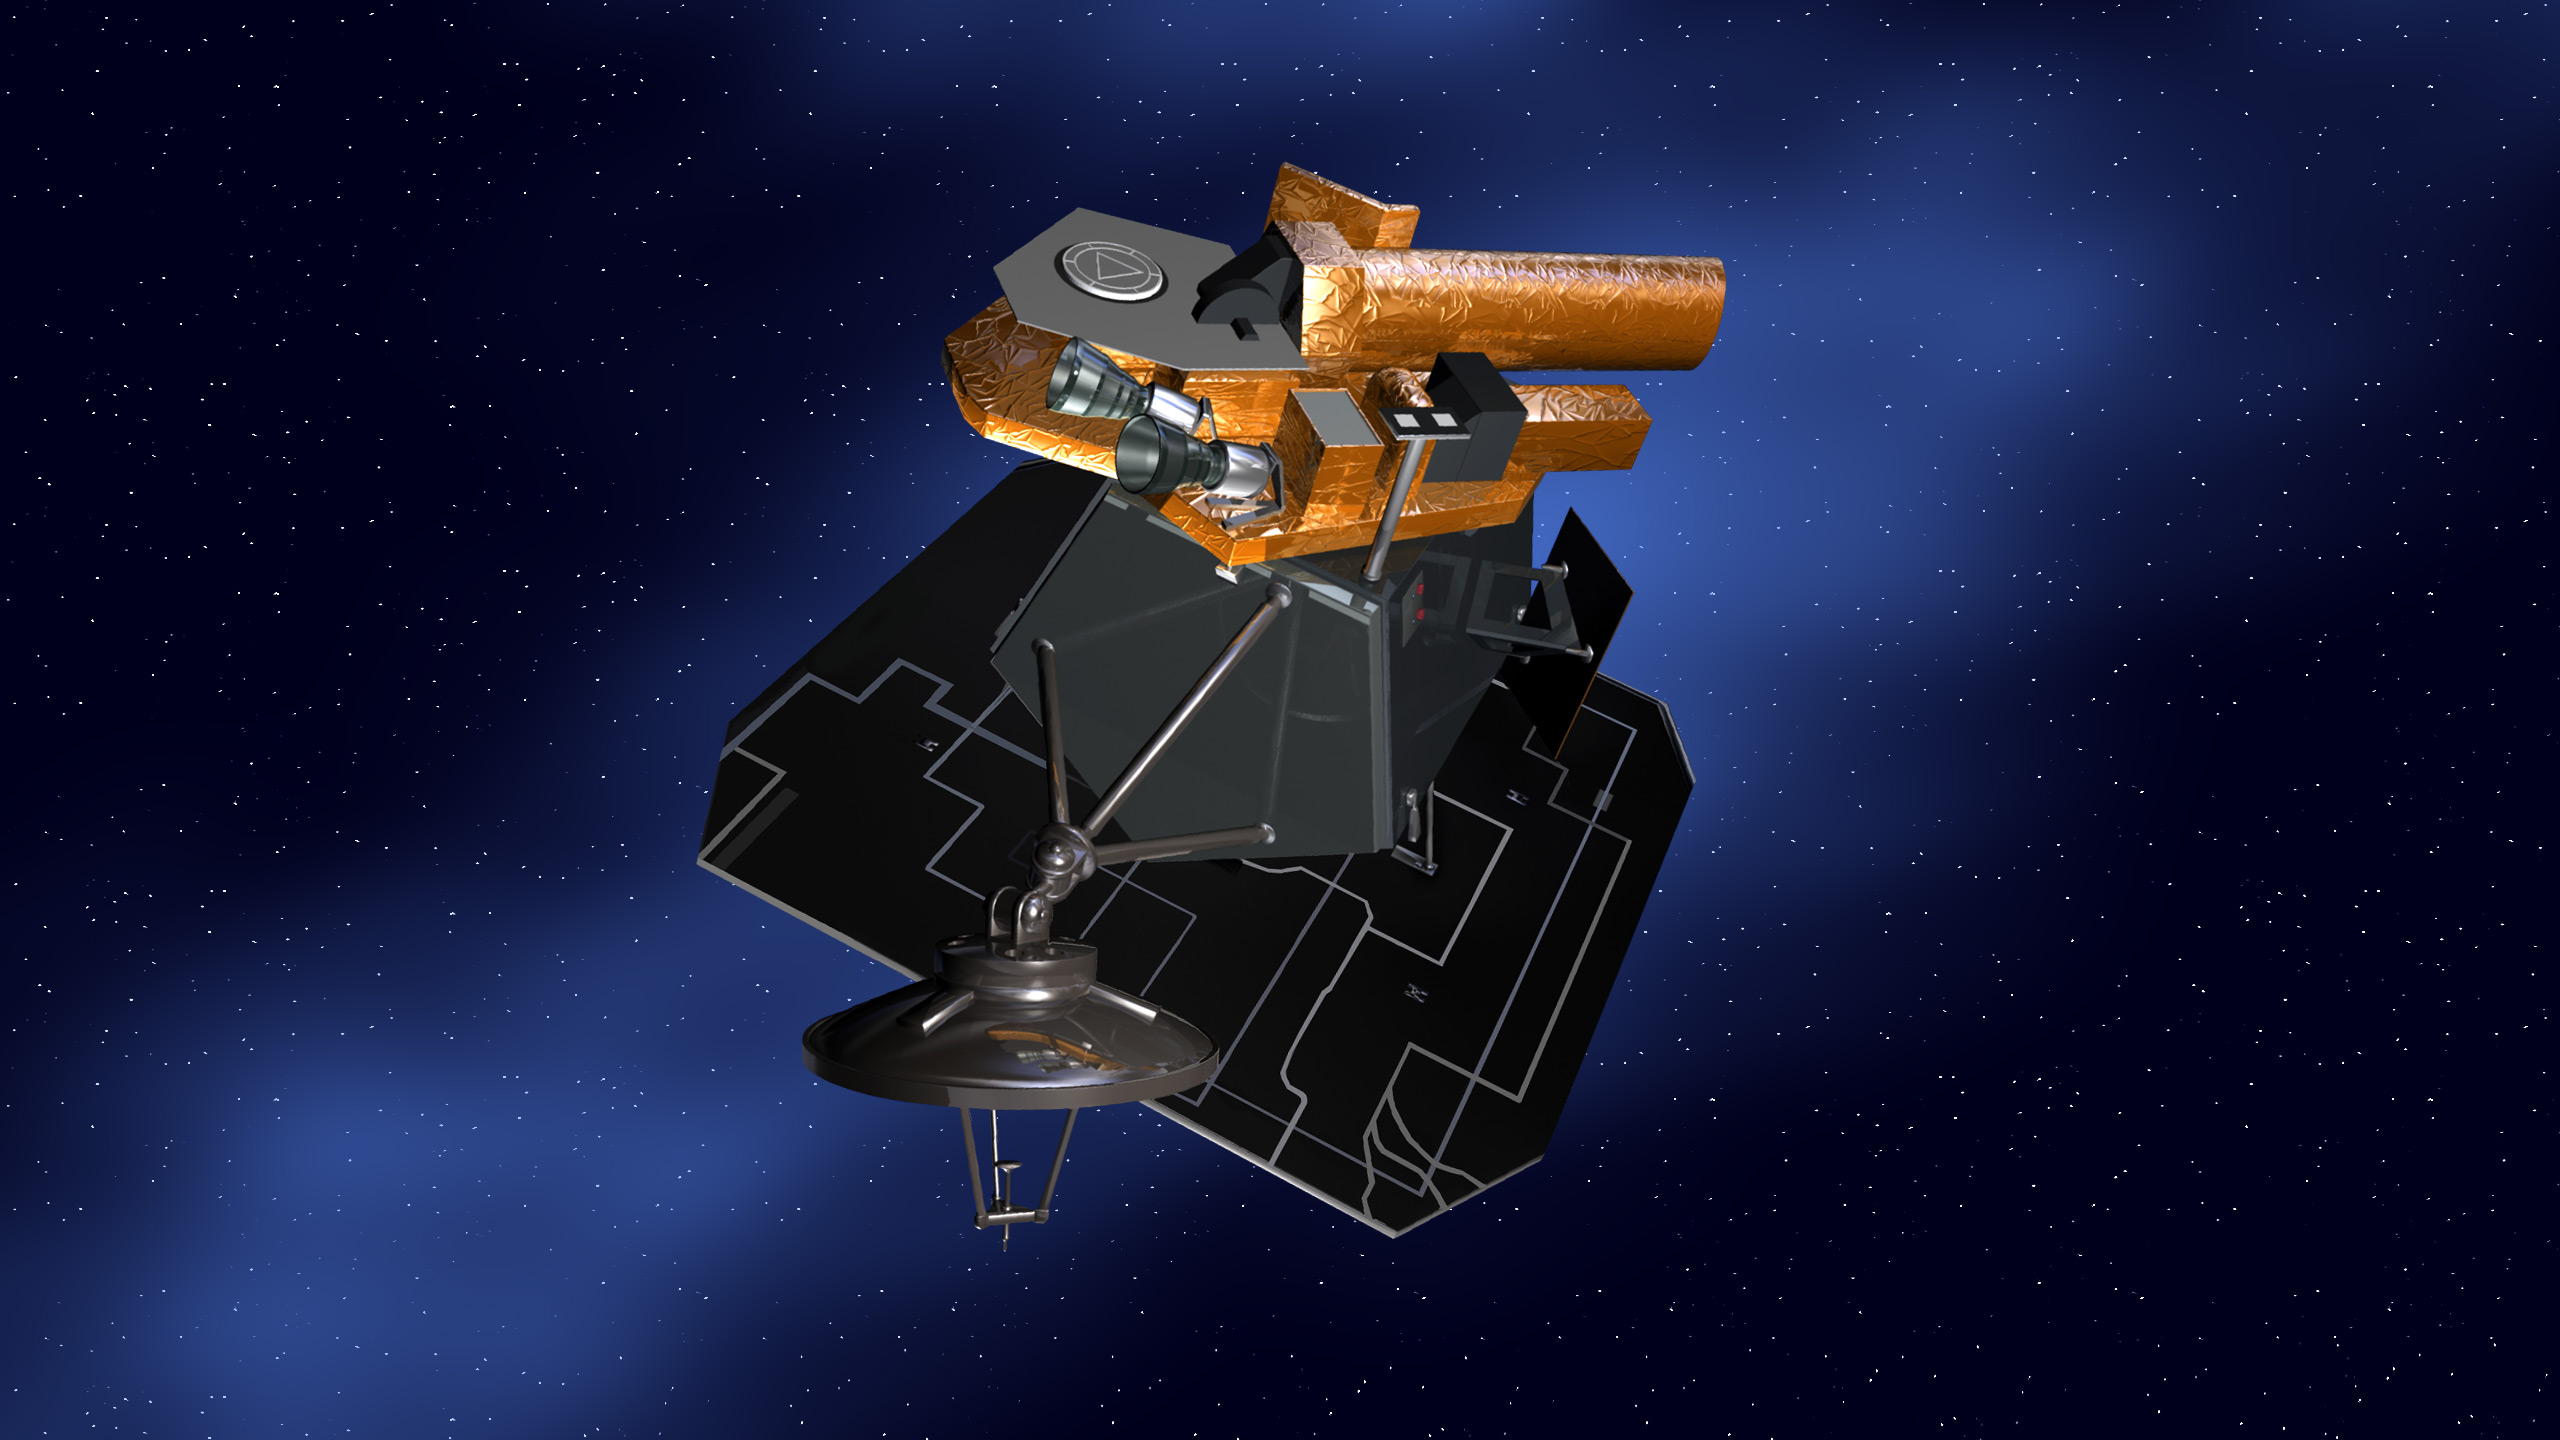 The Deep Impact spacecraft, depicted here in flight, is feared lost after a period of no communication since August 8. Image Credit: NASA/JPL-Caltech.